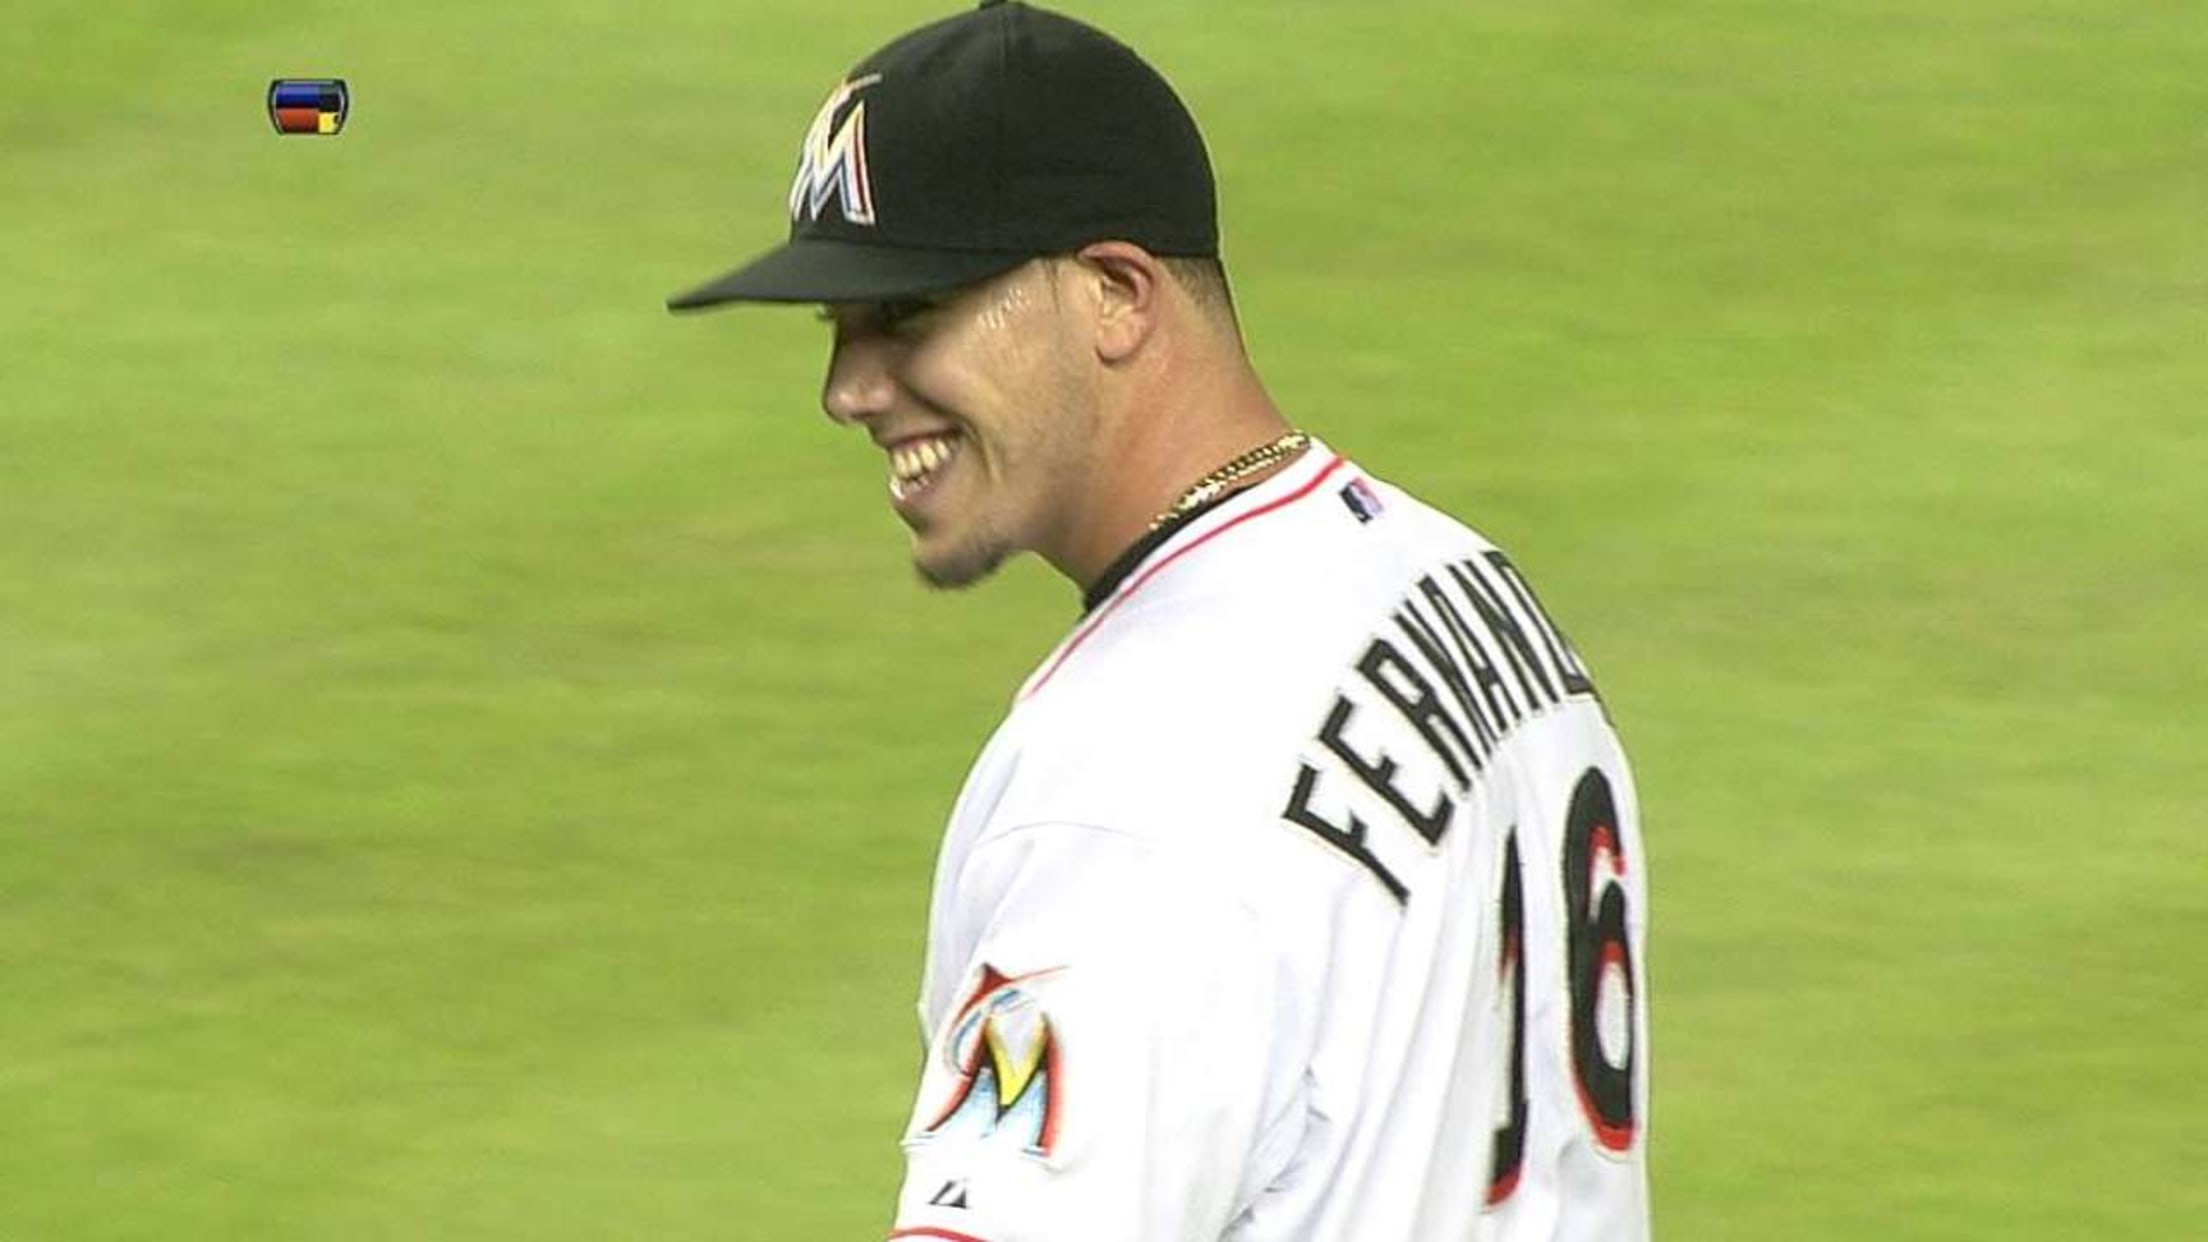 Pitching prospect Jose Fernandez creating buzz as Miami Marlins open camp